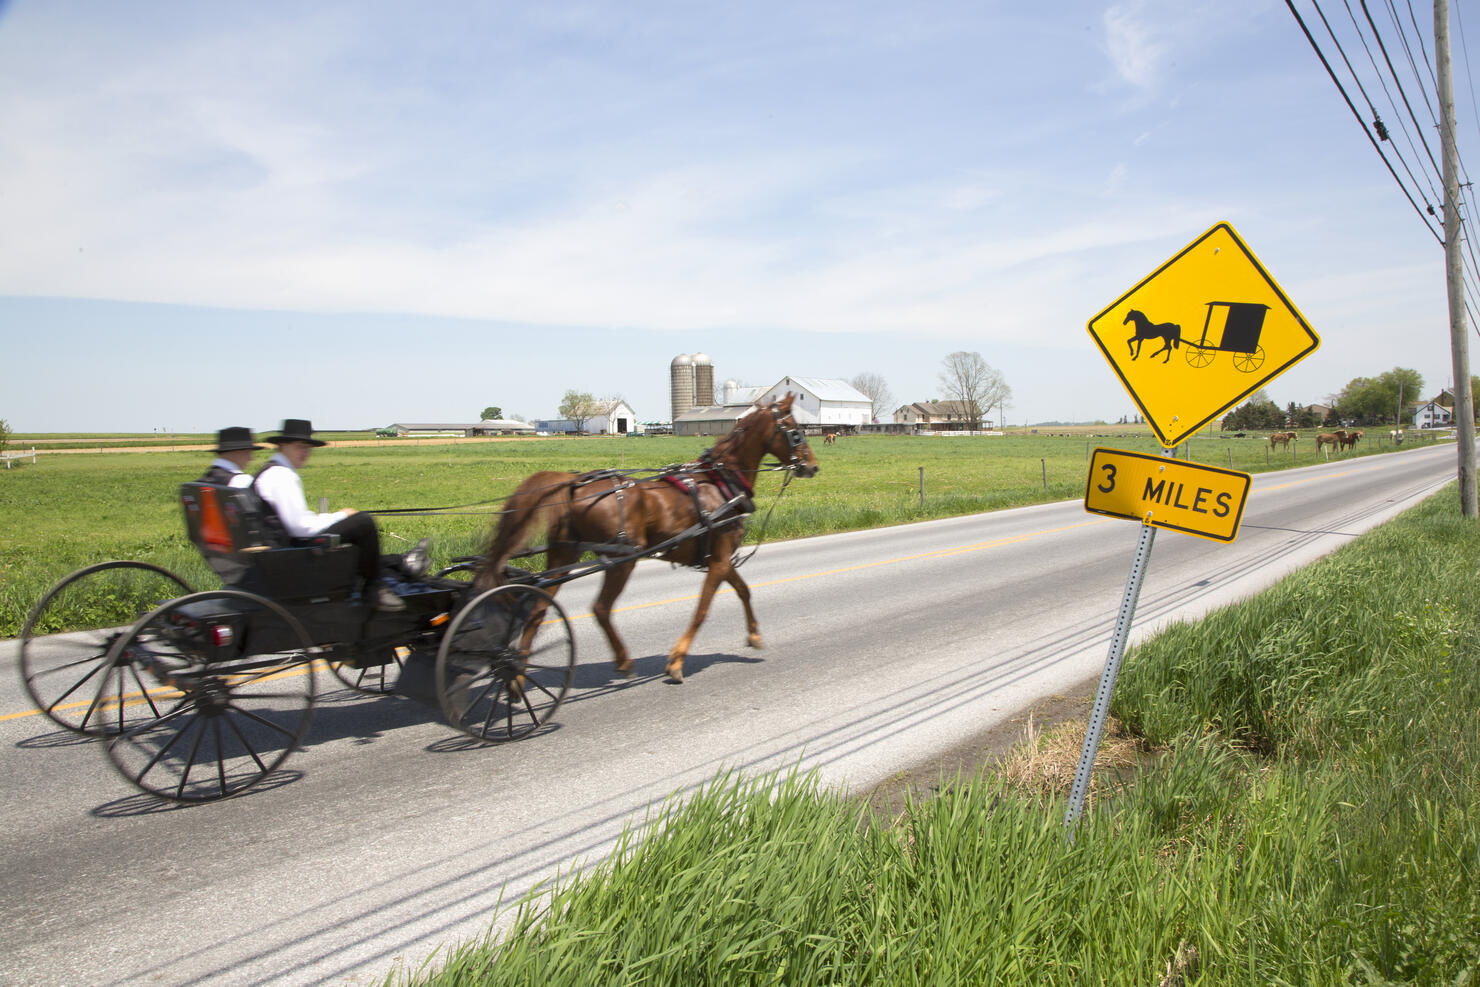 Amish horse and buggy